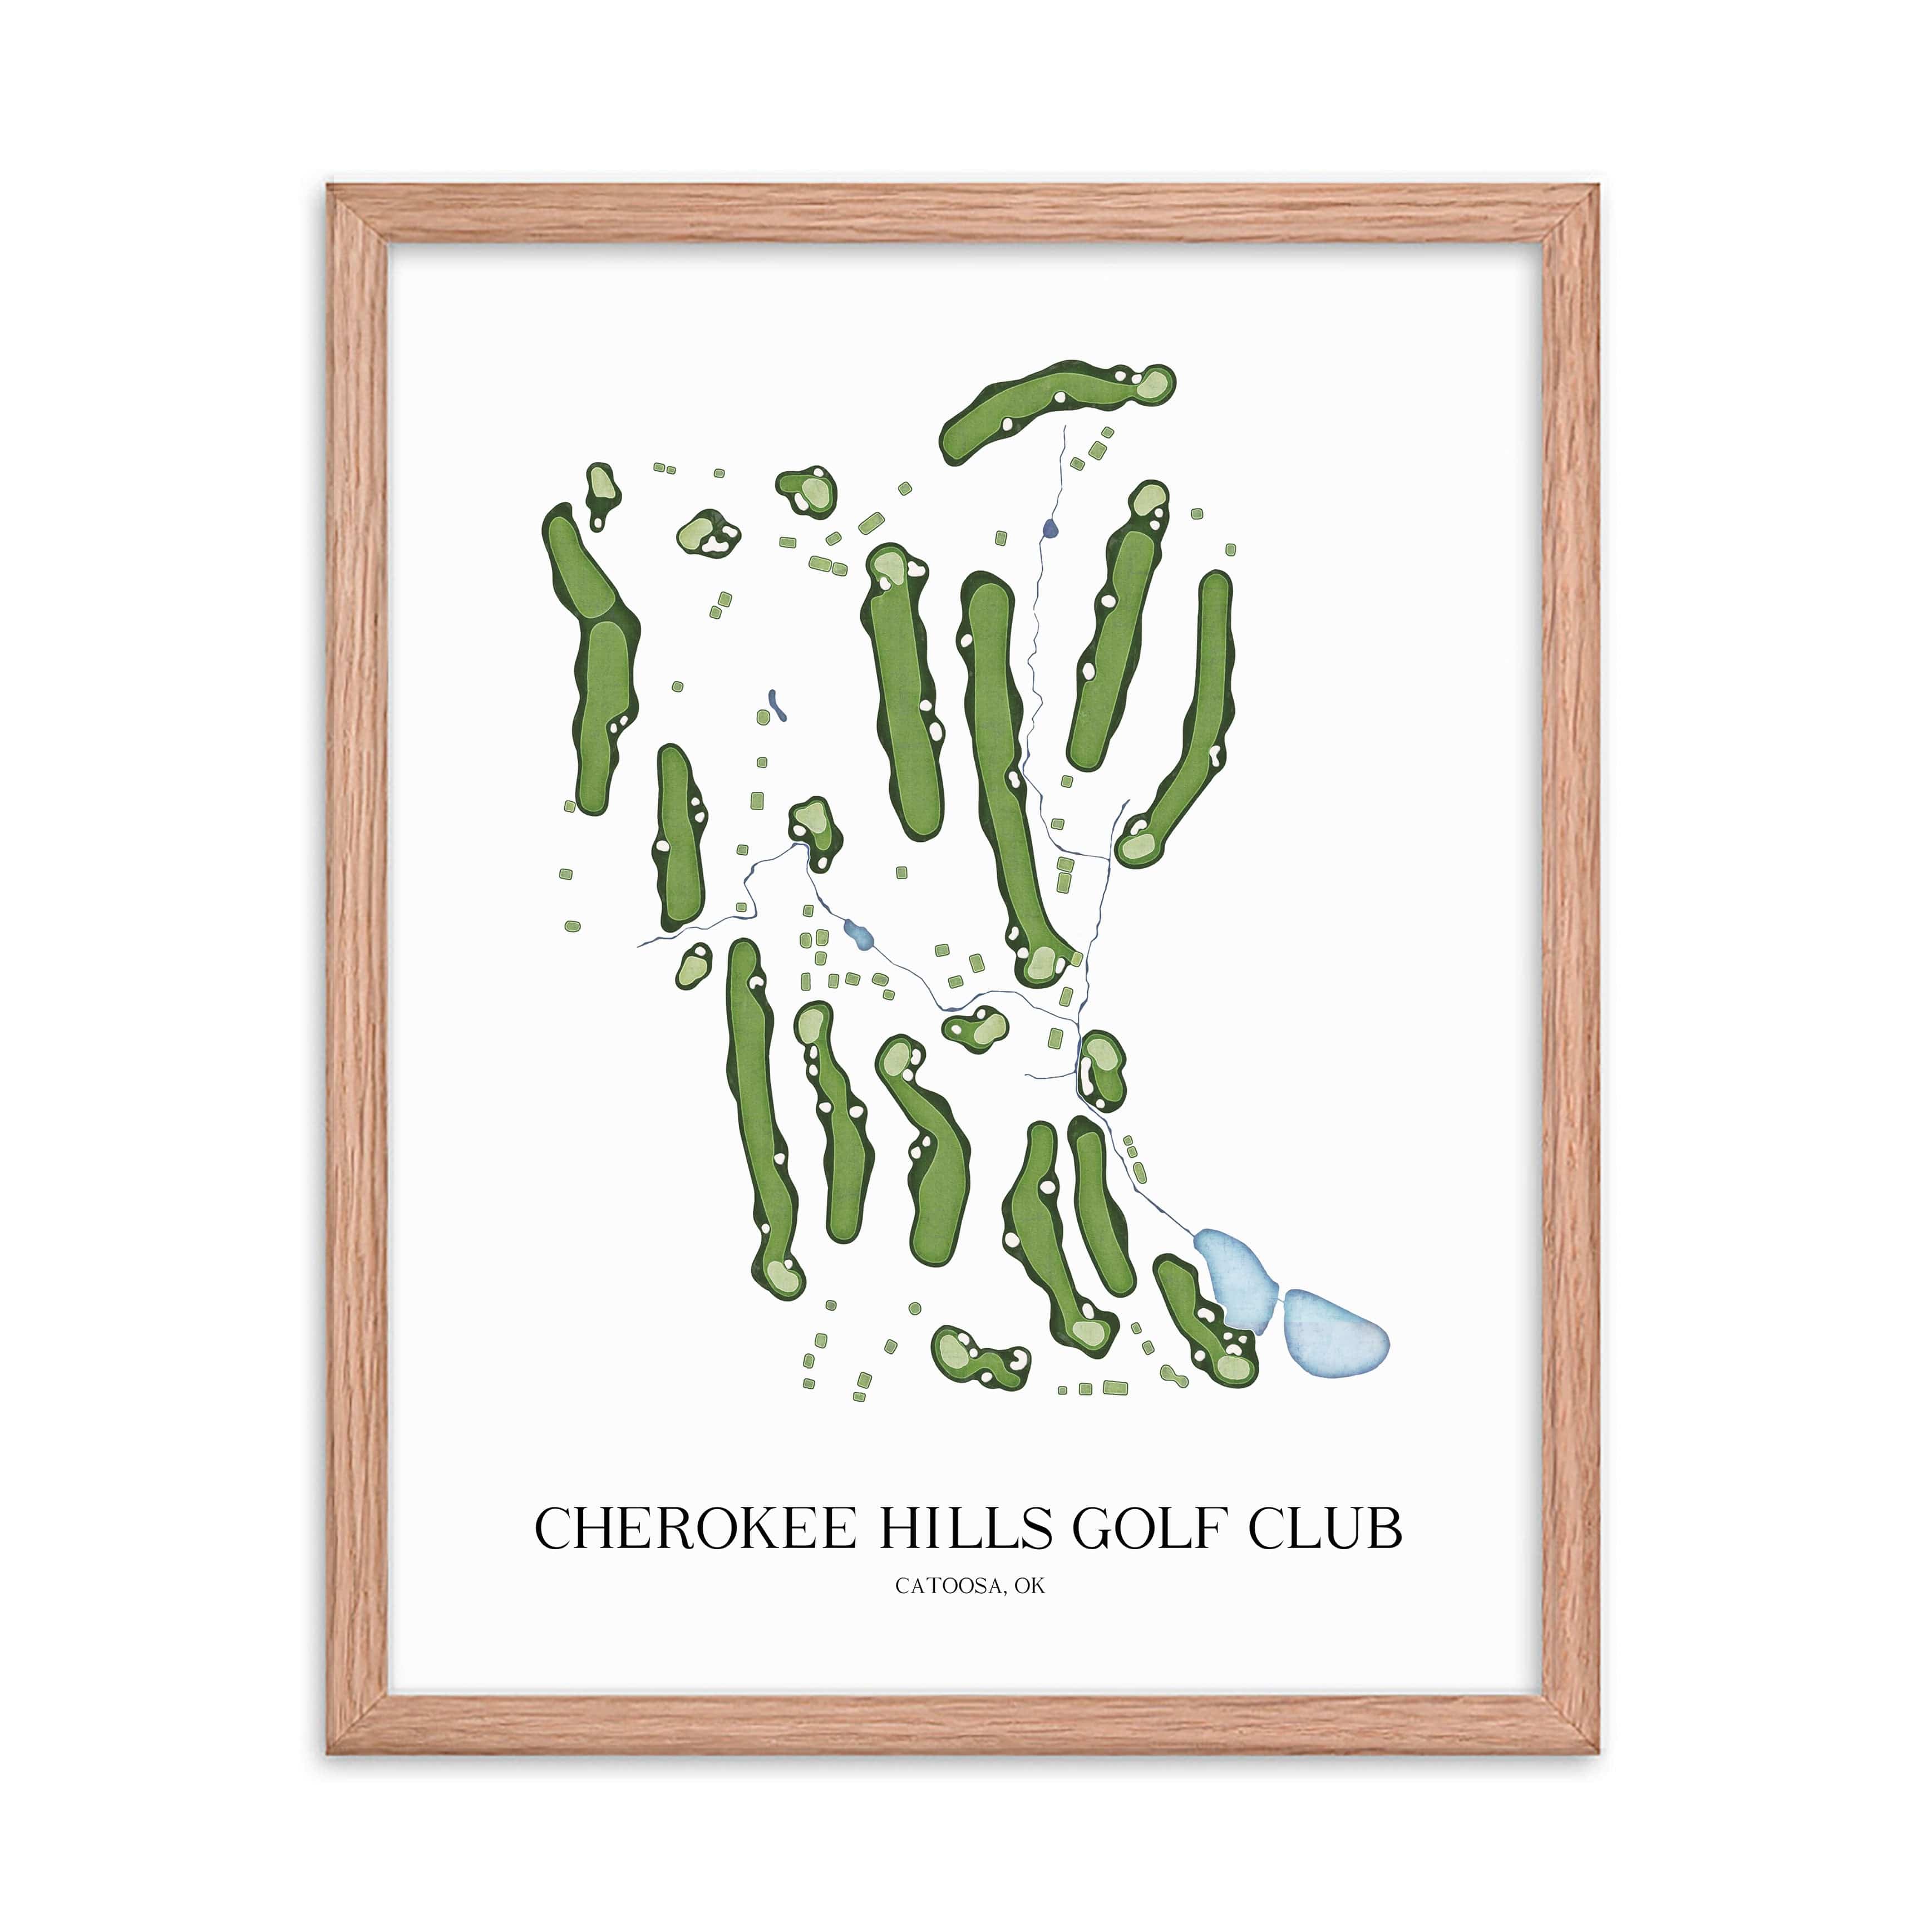 The 19th Hole Golf Shop - Golf Course Prints -  Cherokee Hills Golf Club Golf Course Map